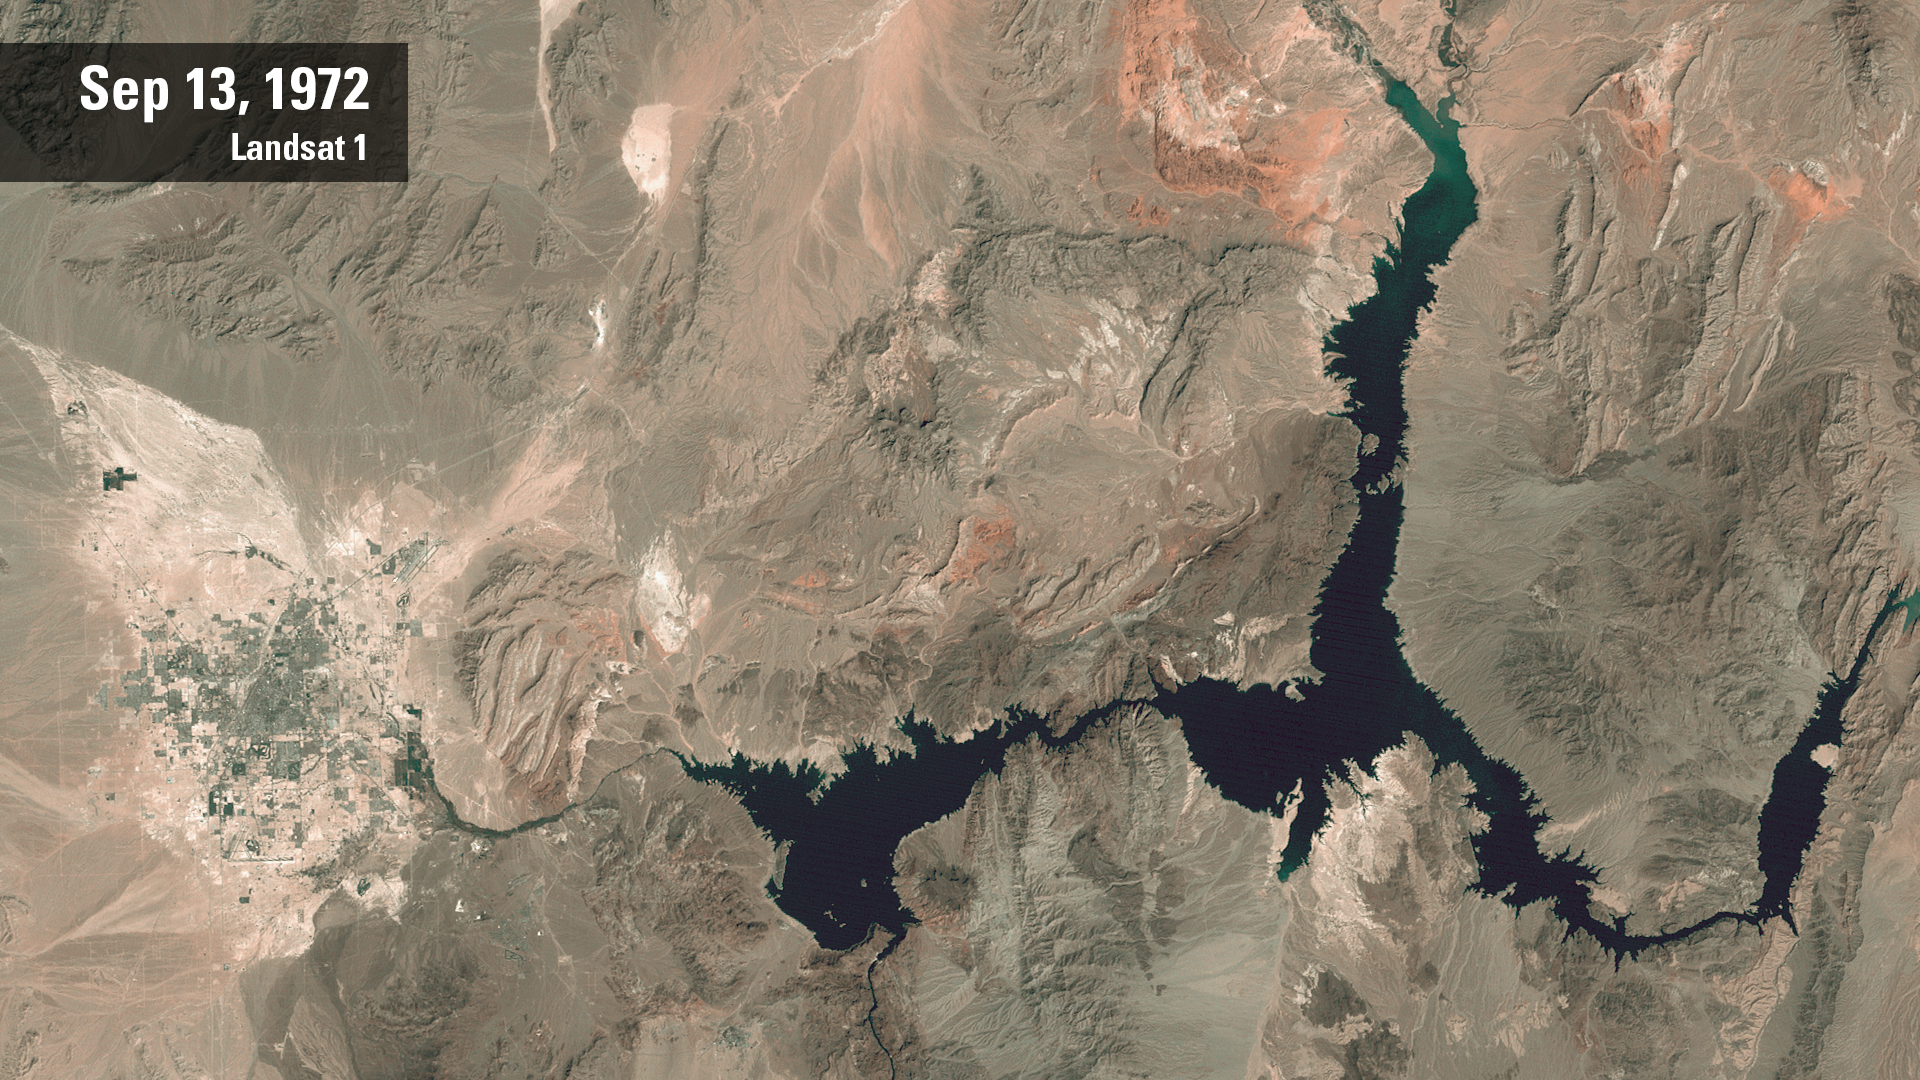 Lake Mead and the Megadrought before